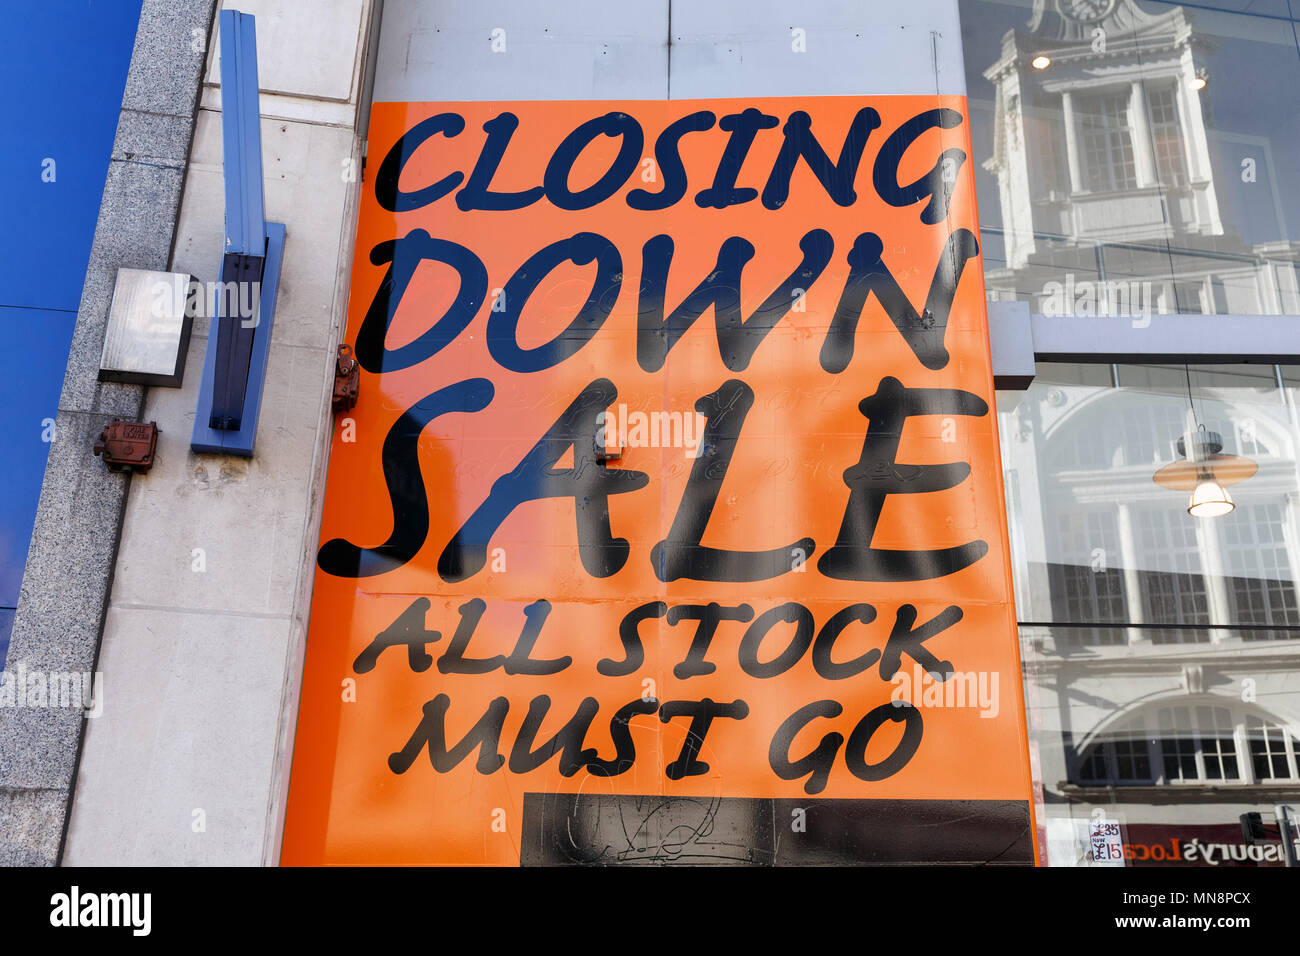 General Business Sign: Clearance Sale All items Must Go